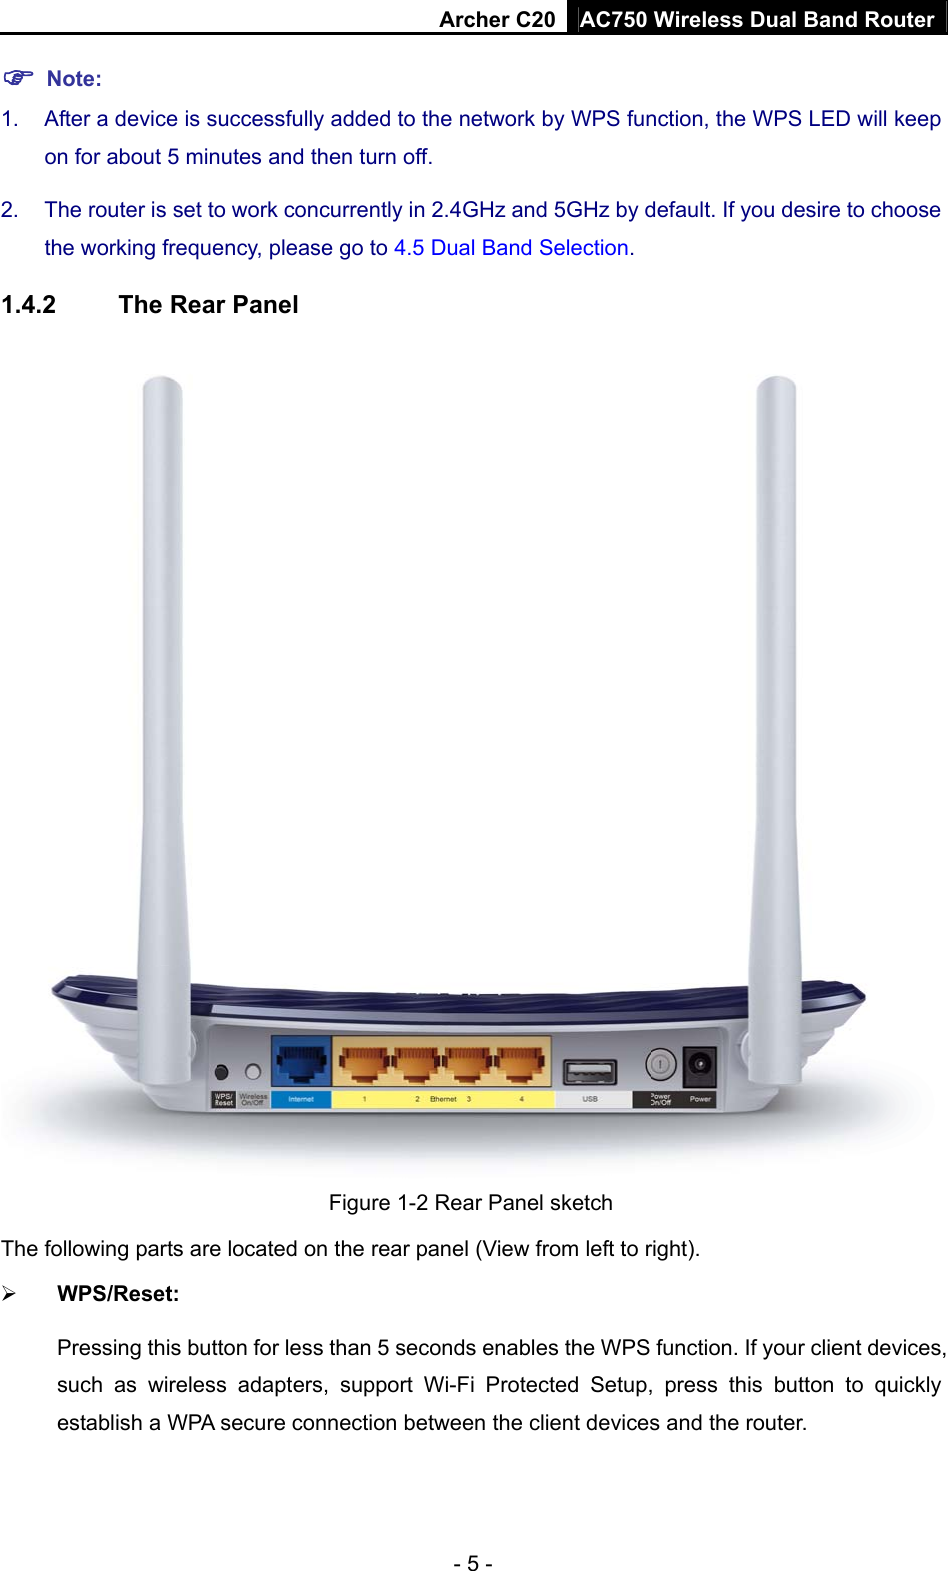 Archer C20 AC750 Wireless Dual Band Router - 5 -  Note: 1.  After a device is successfully added to the network by WPS function, the WPS LED will keep on for about 5 minutes and then turn off.   2.  The router is set to work concurrently in 2.4GHz and 5GHz by default. If you desire to choose the working frequency, please go to 4.5 Dual Band Selection. 1.4.2  The Rear Panel  Figure 1-2 Rear Panel sketch The following parts are located on the rear panel (View from left to right).  WPS/Reset:   Pressing this button for less than 5 seconds enables the WPS function. If your client devices, such as wireless adapters, support Wi-Fi Protected Setup, press this button to quickly establish a WPA secure connection between the client devices and the router.   